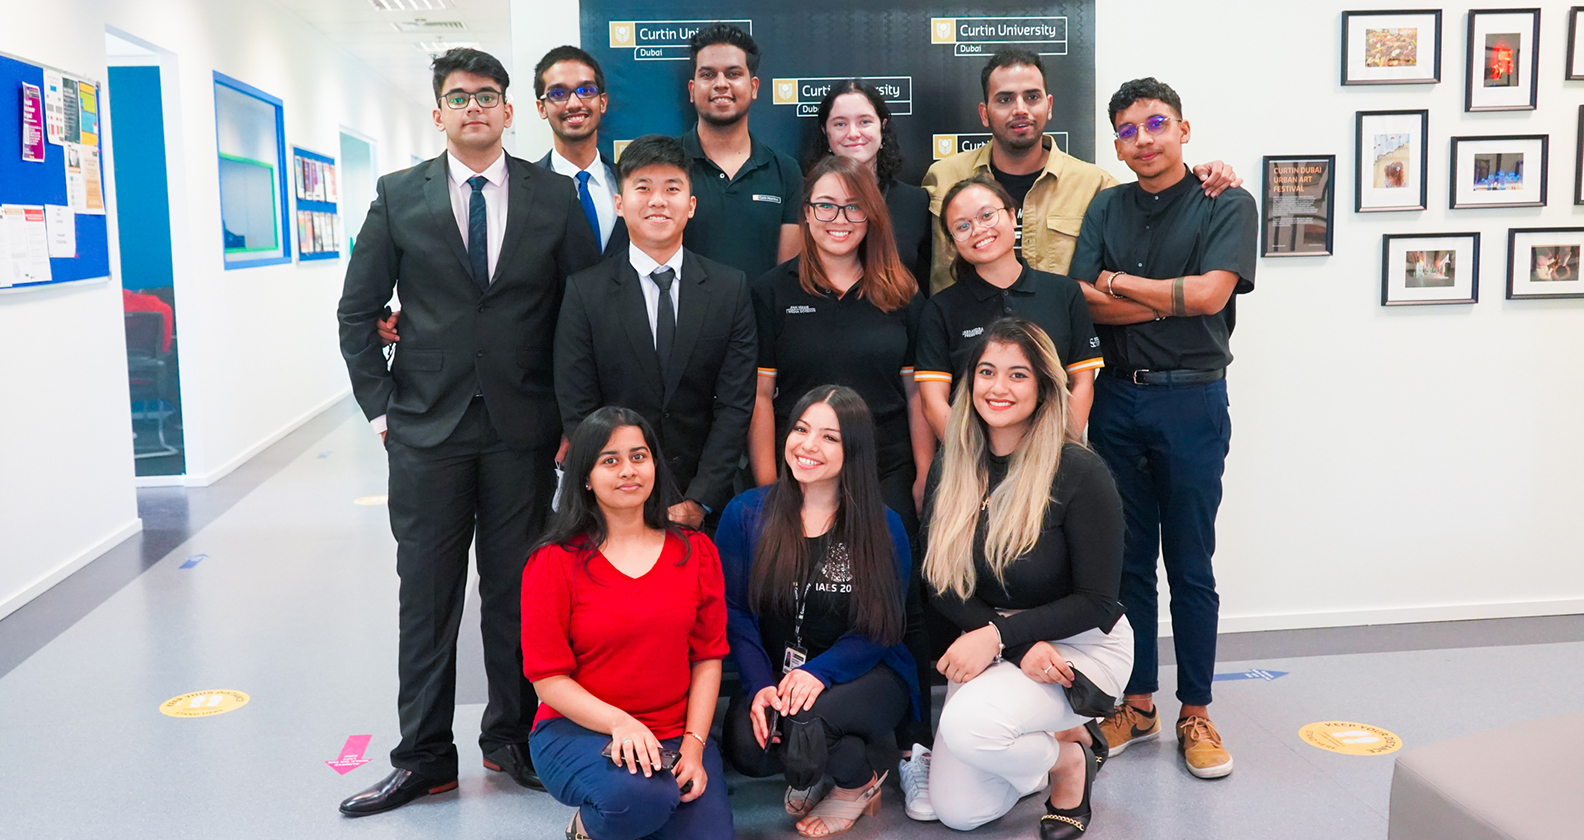 Student leaders gather for historic global Curtin summit